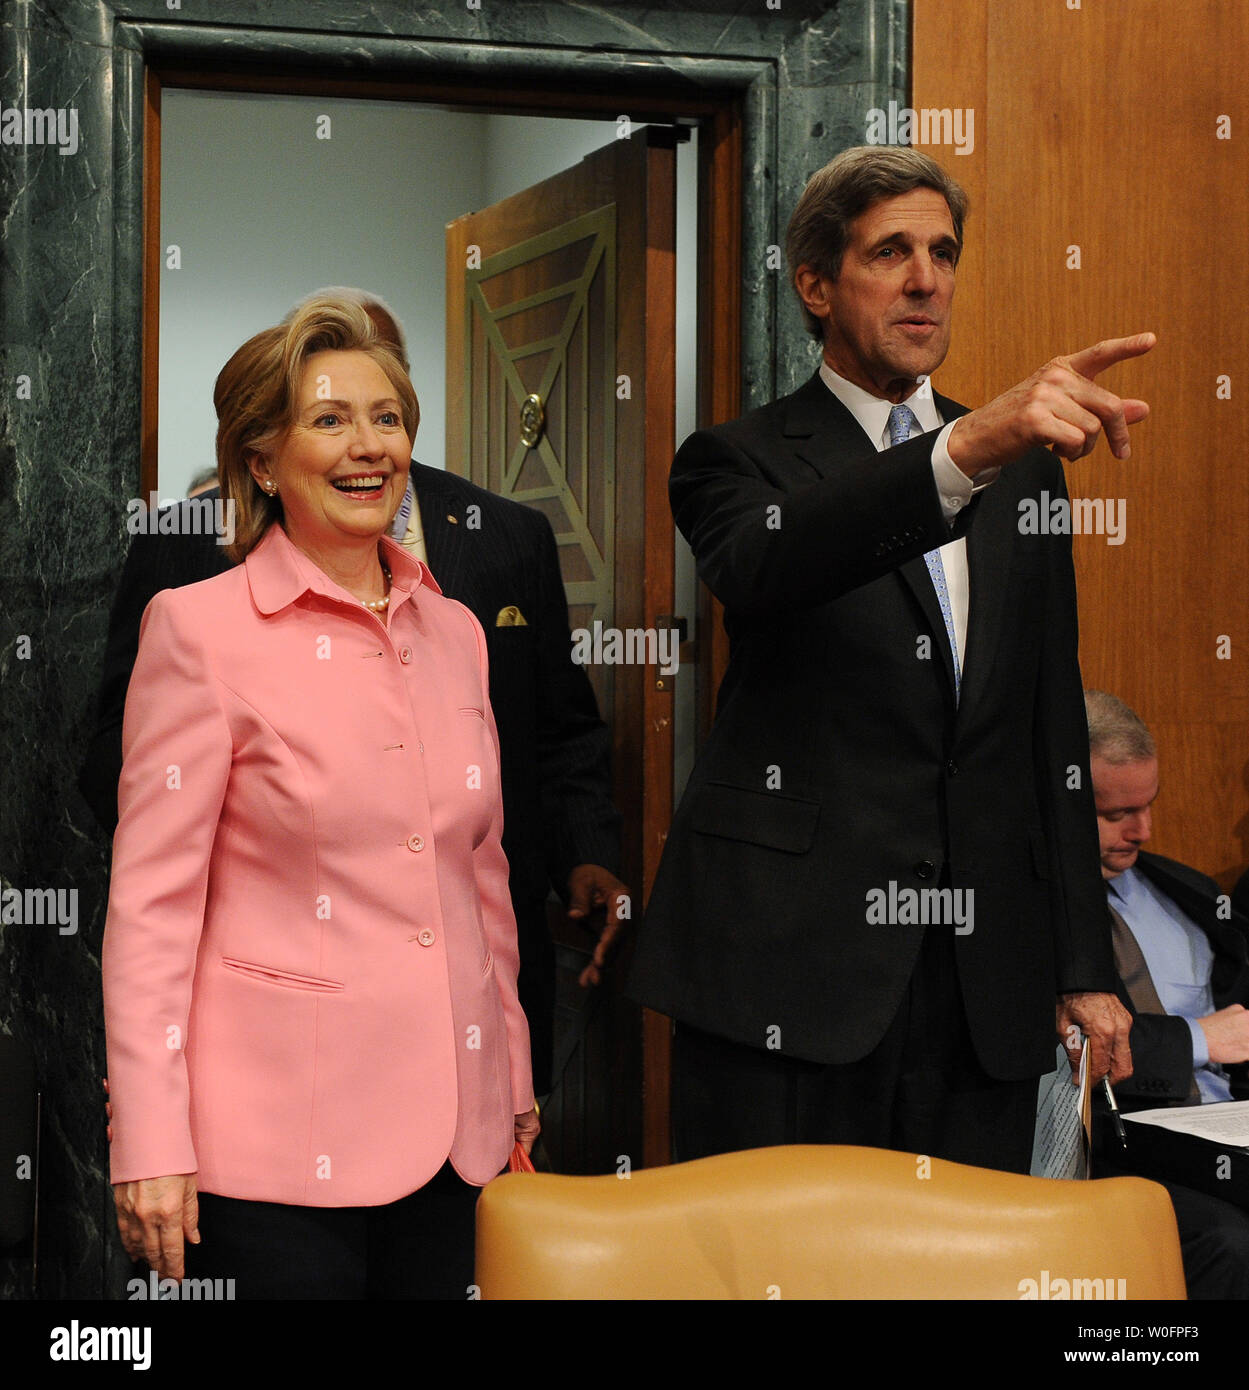 Sen. John Kerry, D-MA, chats with Secretary of State Hillary Rodham Clinton before the Senate Foreign Relations Committee regarding the new START treaty on Capitol Hill in Washington on May 18, 2010. The Strategic Arms Reduction Treaty (START) between the U.S. and Russia, aimed at reducing nuclear arms, was signed in Prague on April 8, 2010.   UPI/Roger L. Wollenberg Stock Photo